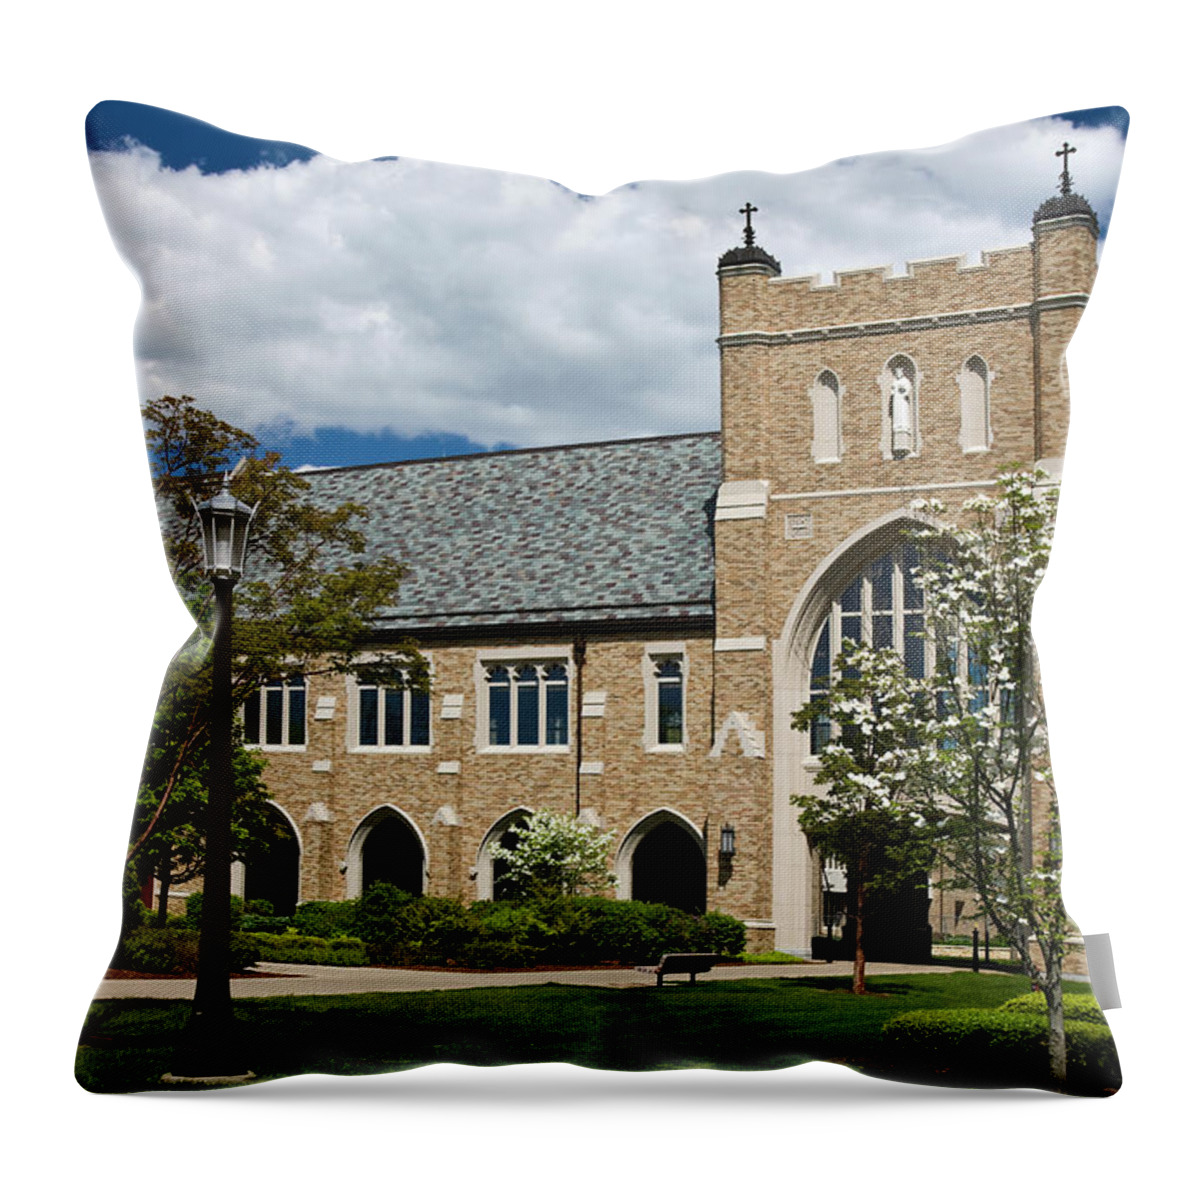 University Of Notre Dame Law School Throw Pillow featuring the photograph University of Notre Dame Law School by Sally Weigand